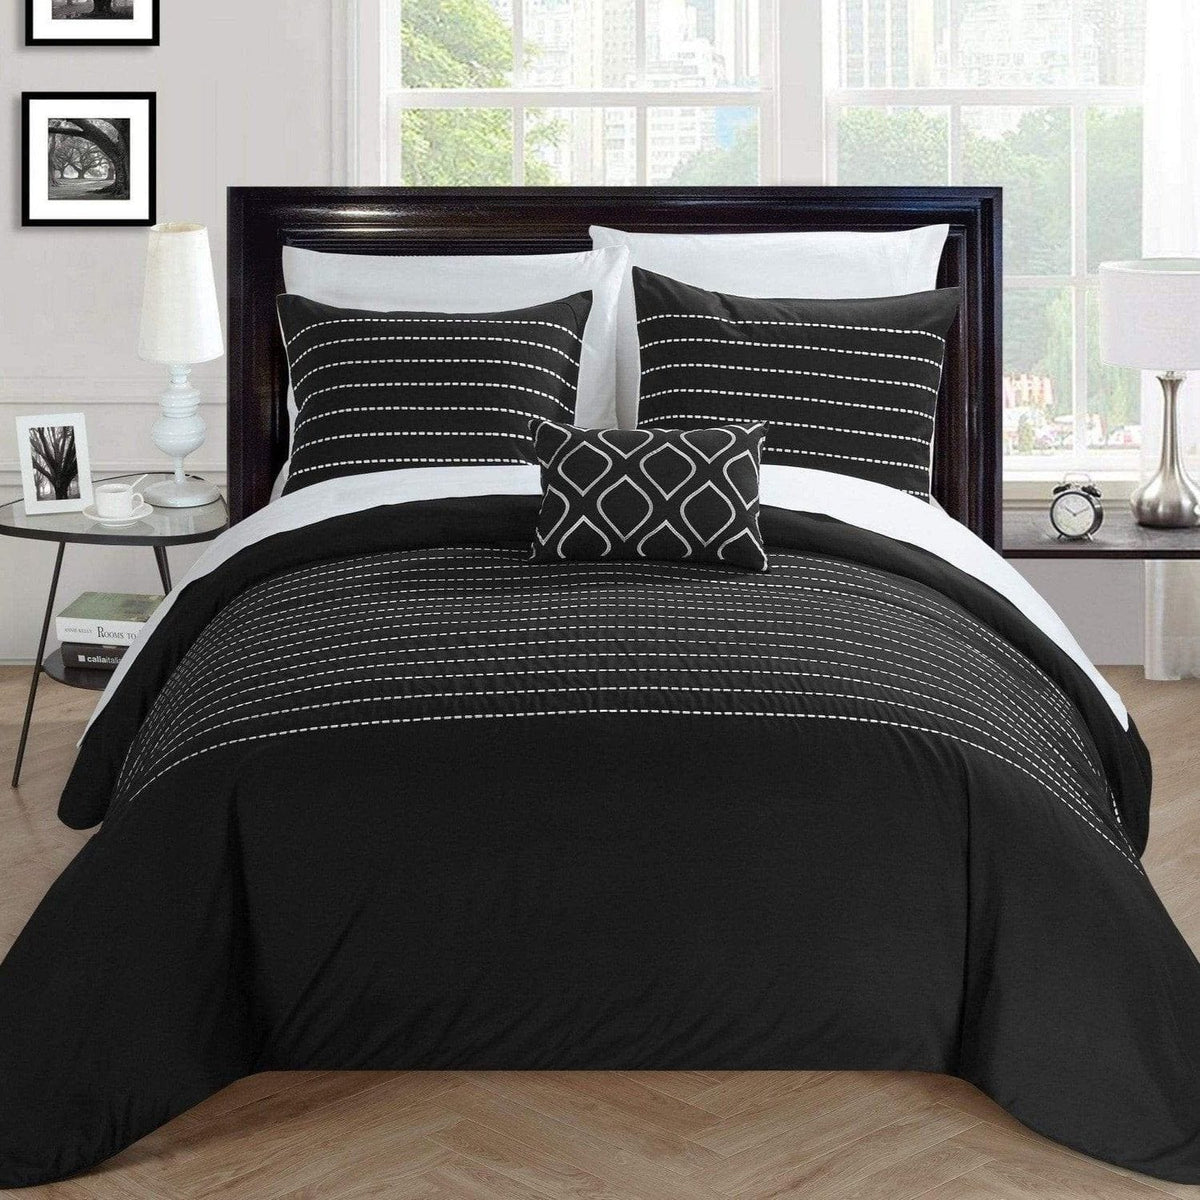 Chic Home Bea 8 Piece Embroidered Duvet Cover Set Black